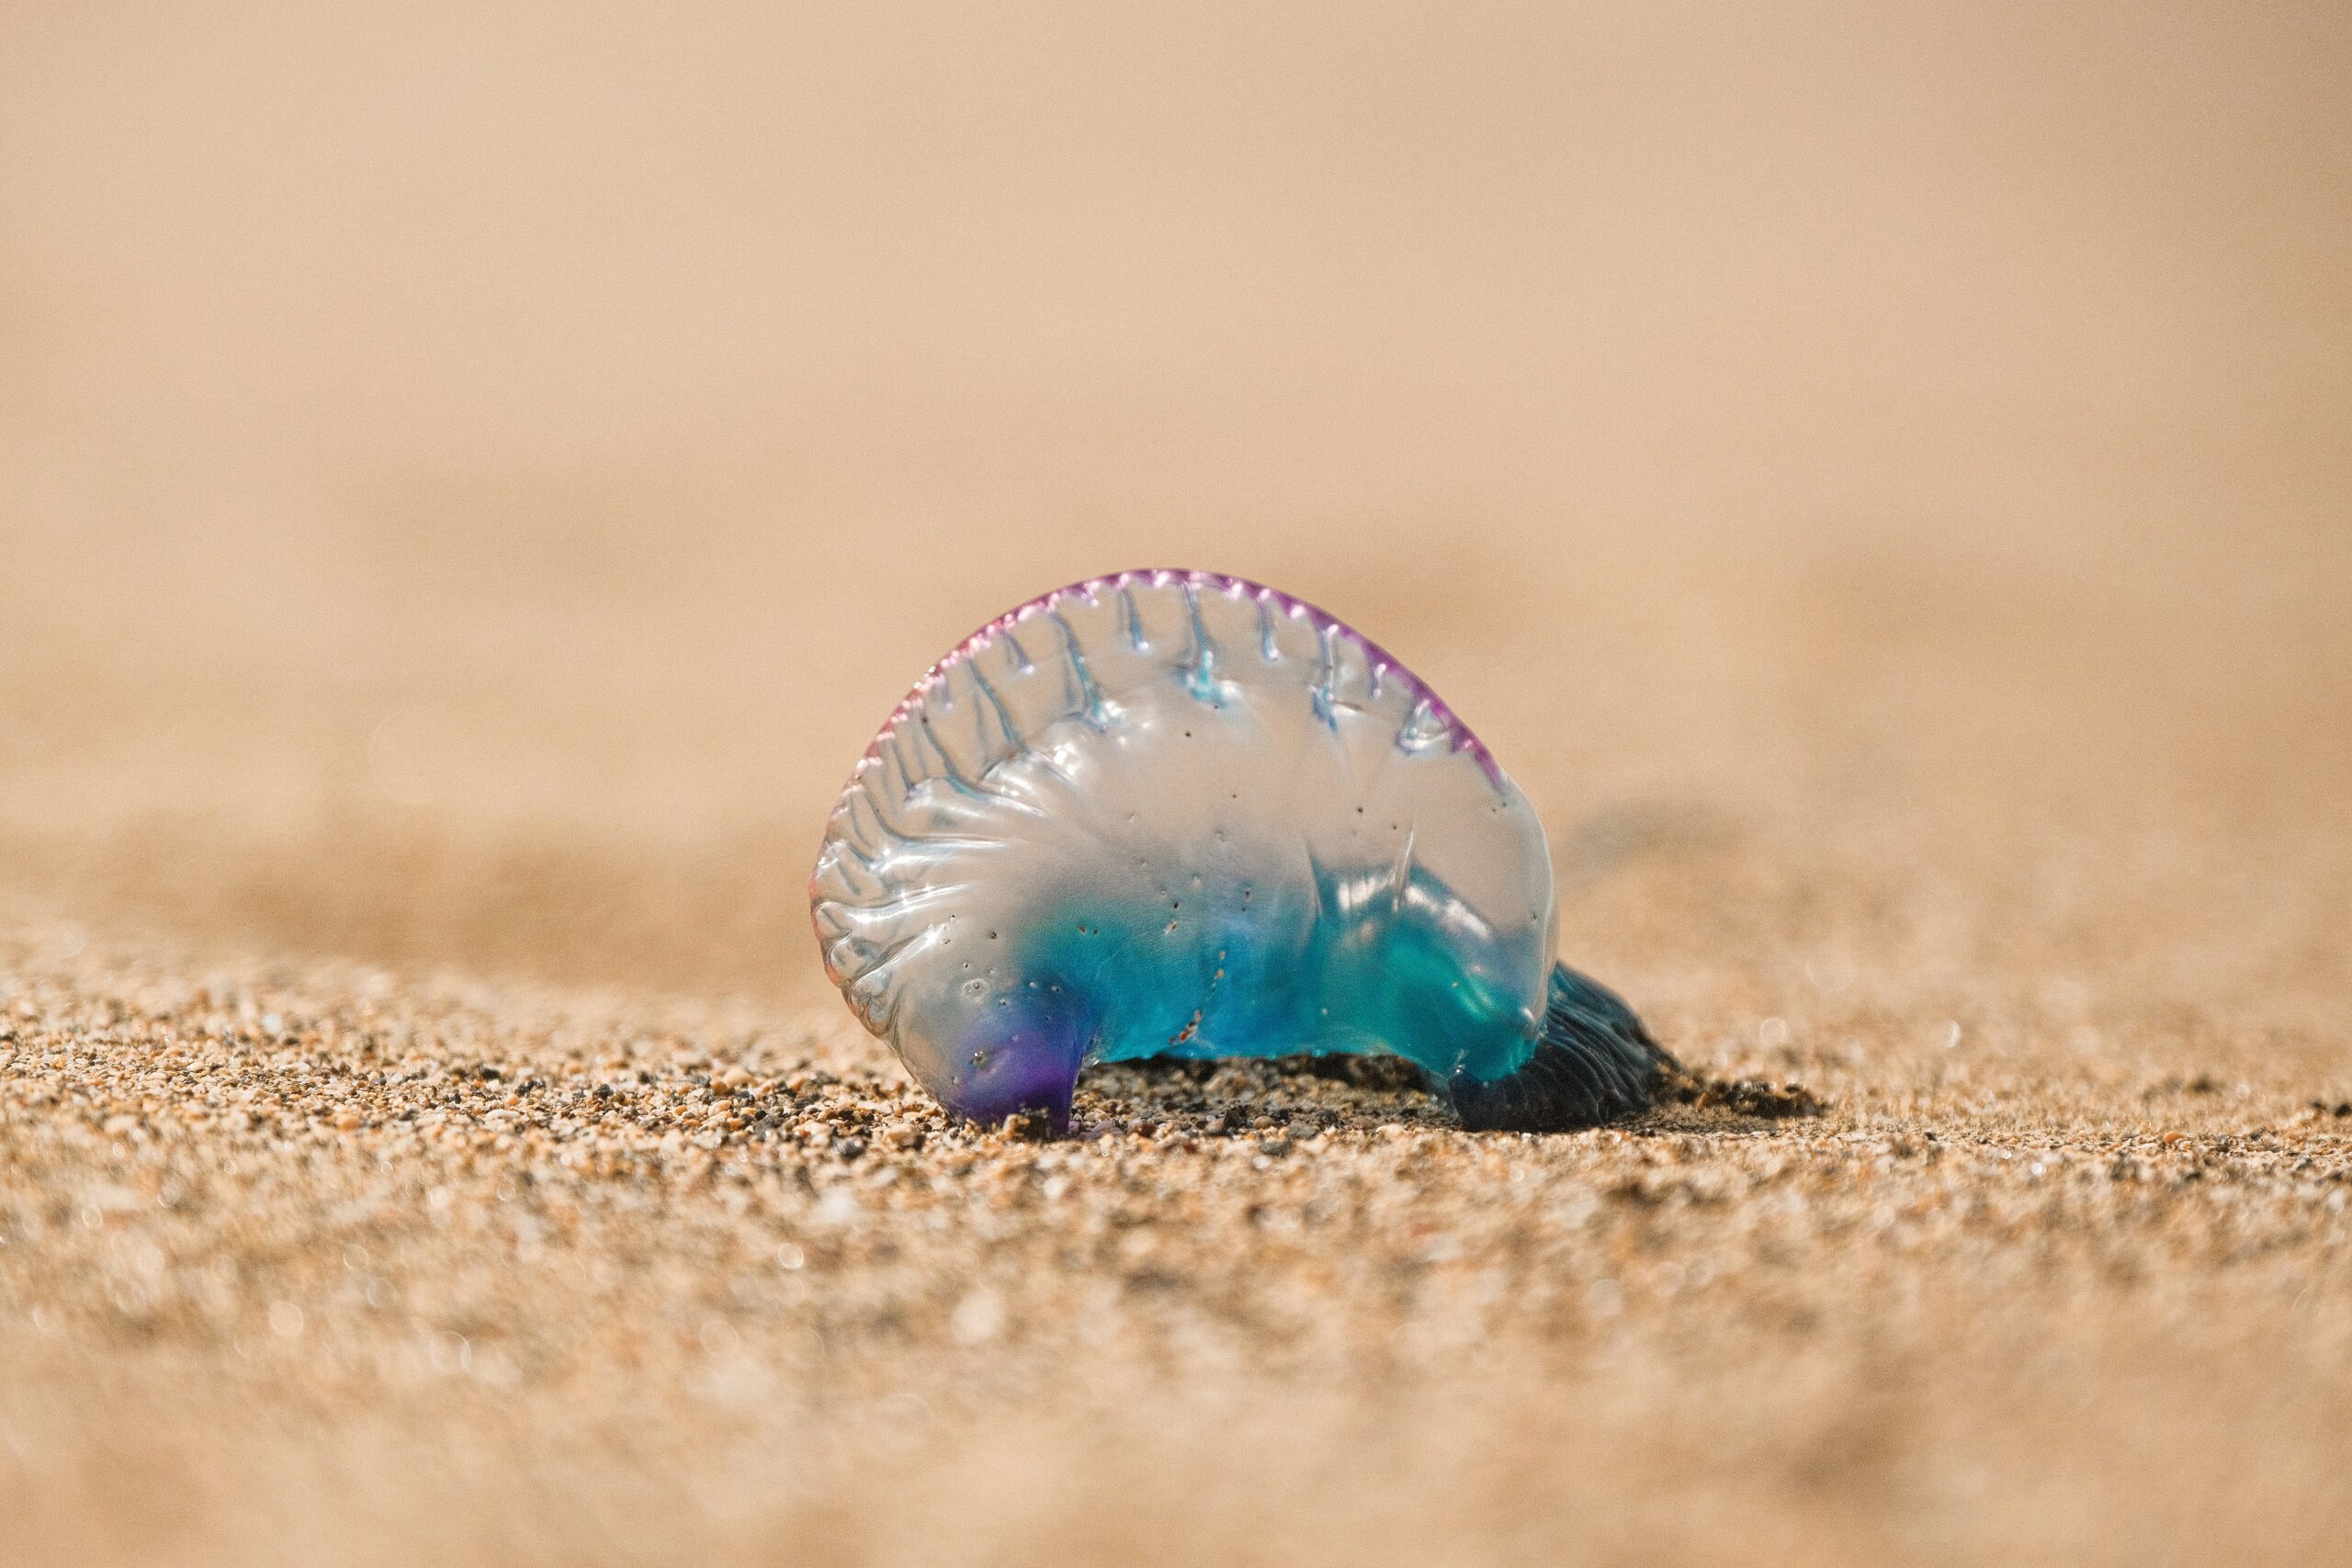 There are many reasons travelers of Bermuda should be cautious when entering the beach waters. 
pictured: a Portuguese Man of War washed up on the beach 